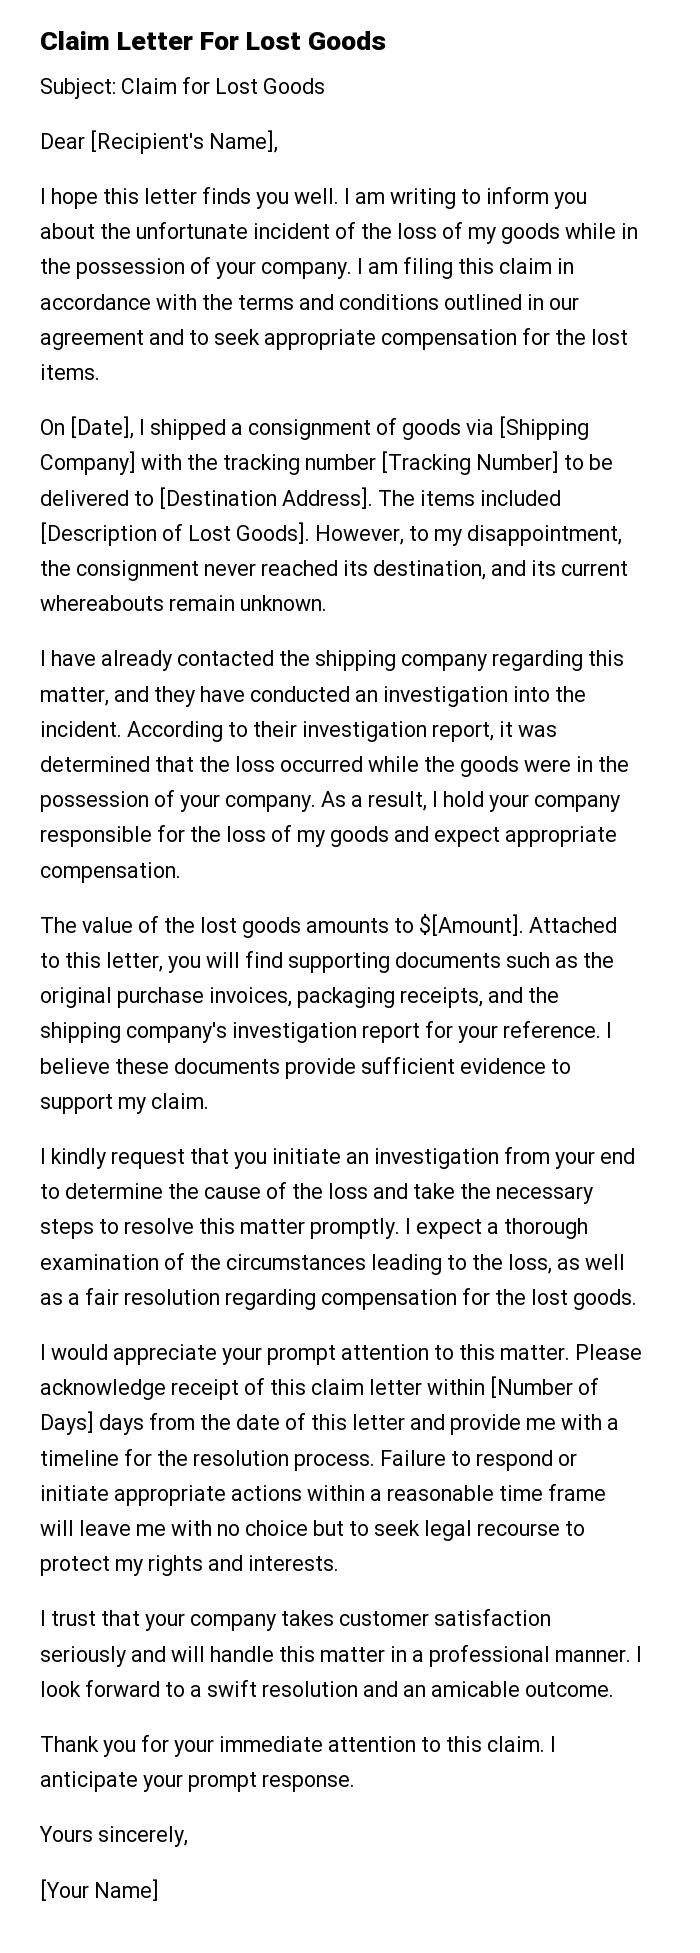 Claim Letter For Lost Goods